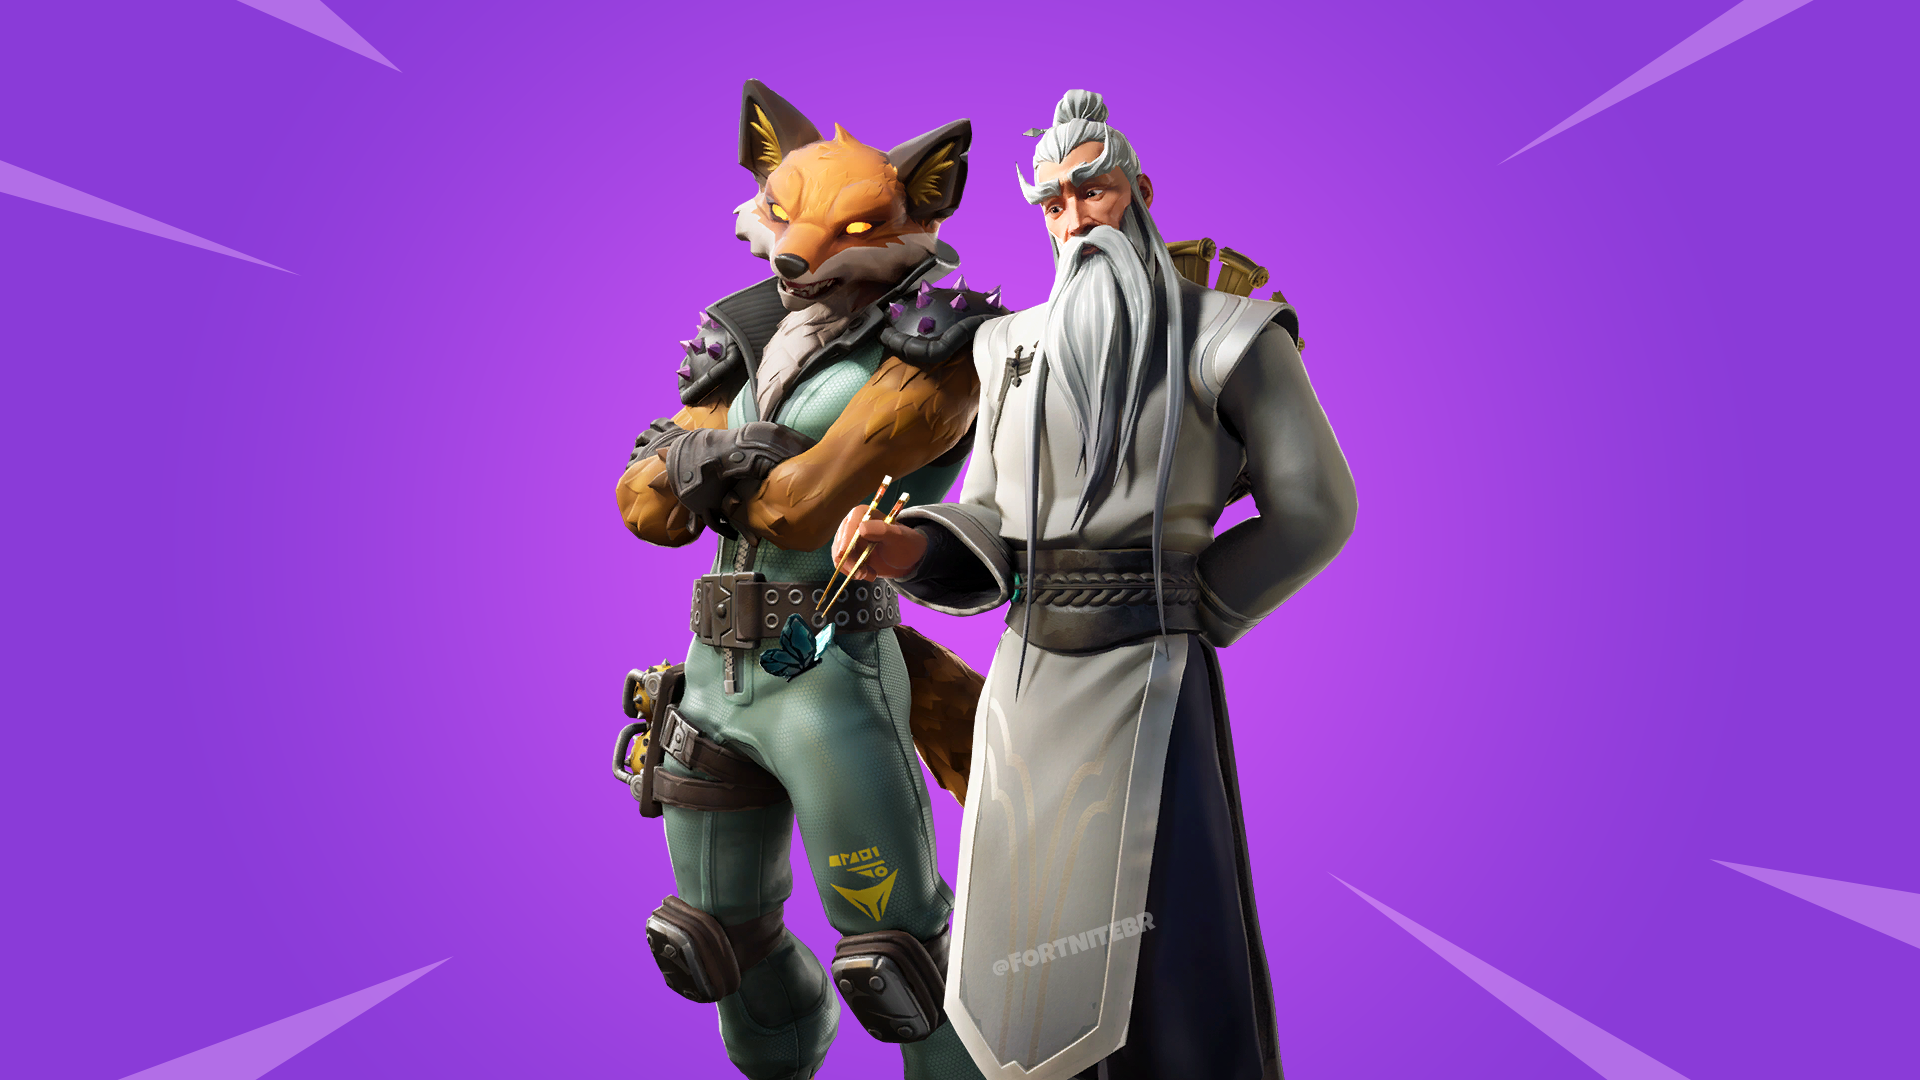 Fortnite Patch v10.10 - All Leaked Cosmetics (Skins, Emotes, Gliders, Wraps)